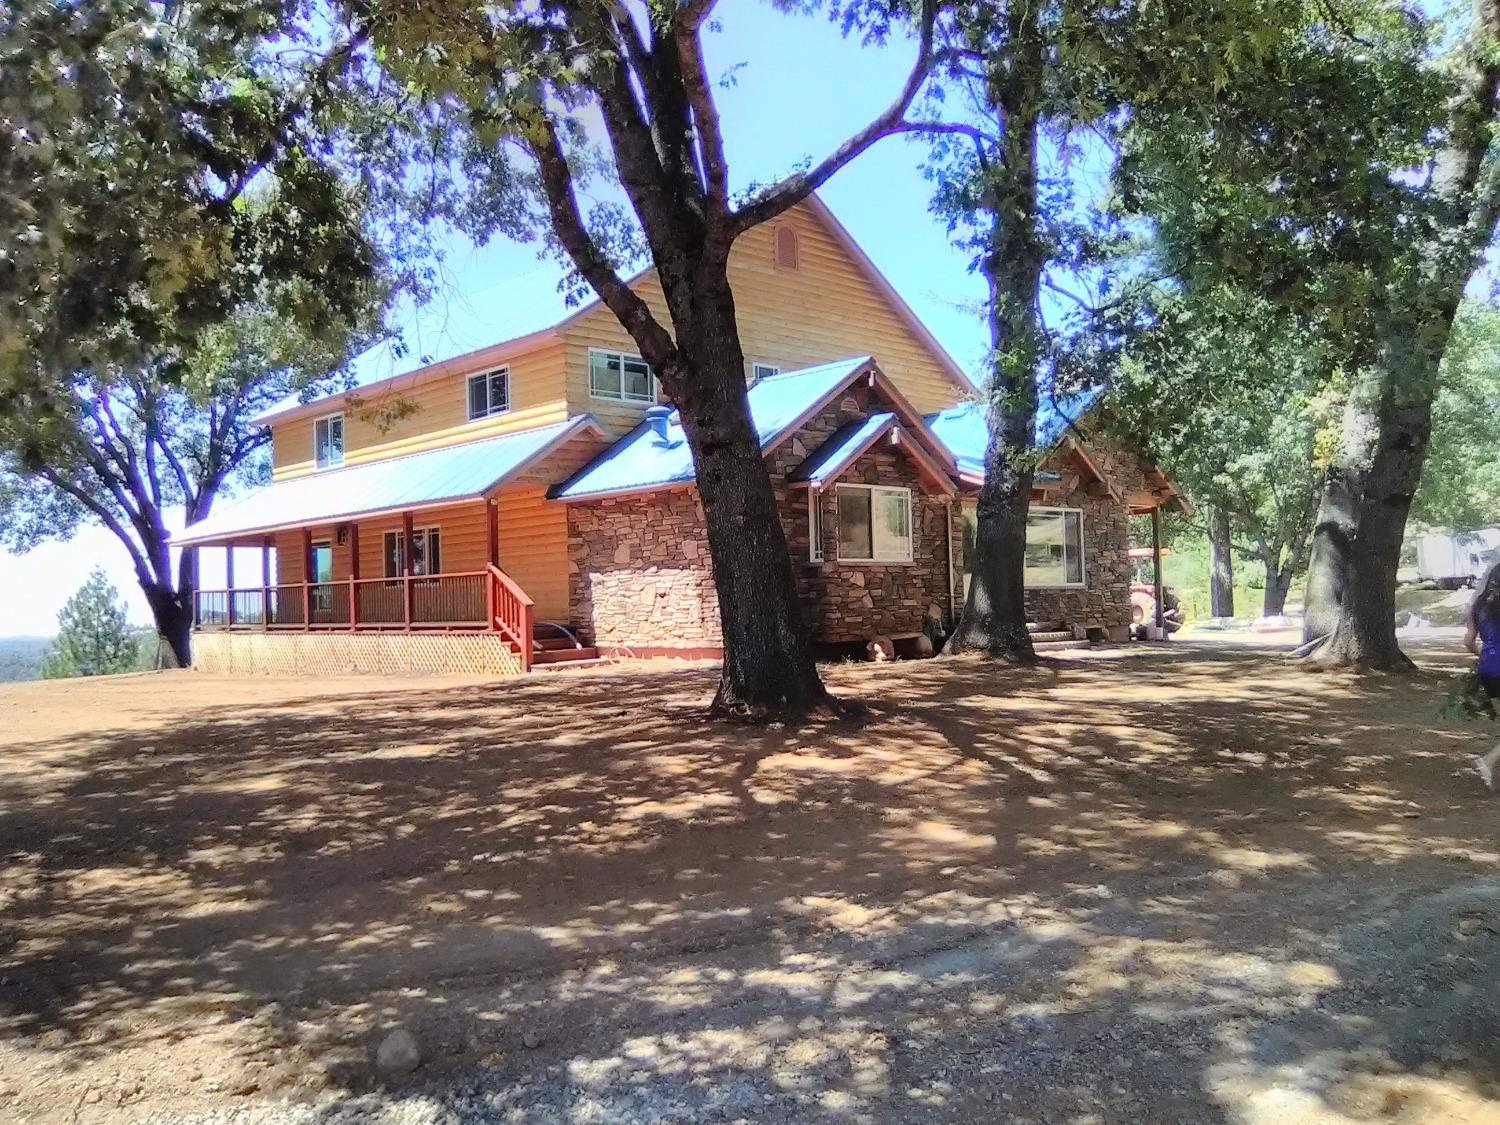 a front view of a house with a tree